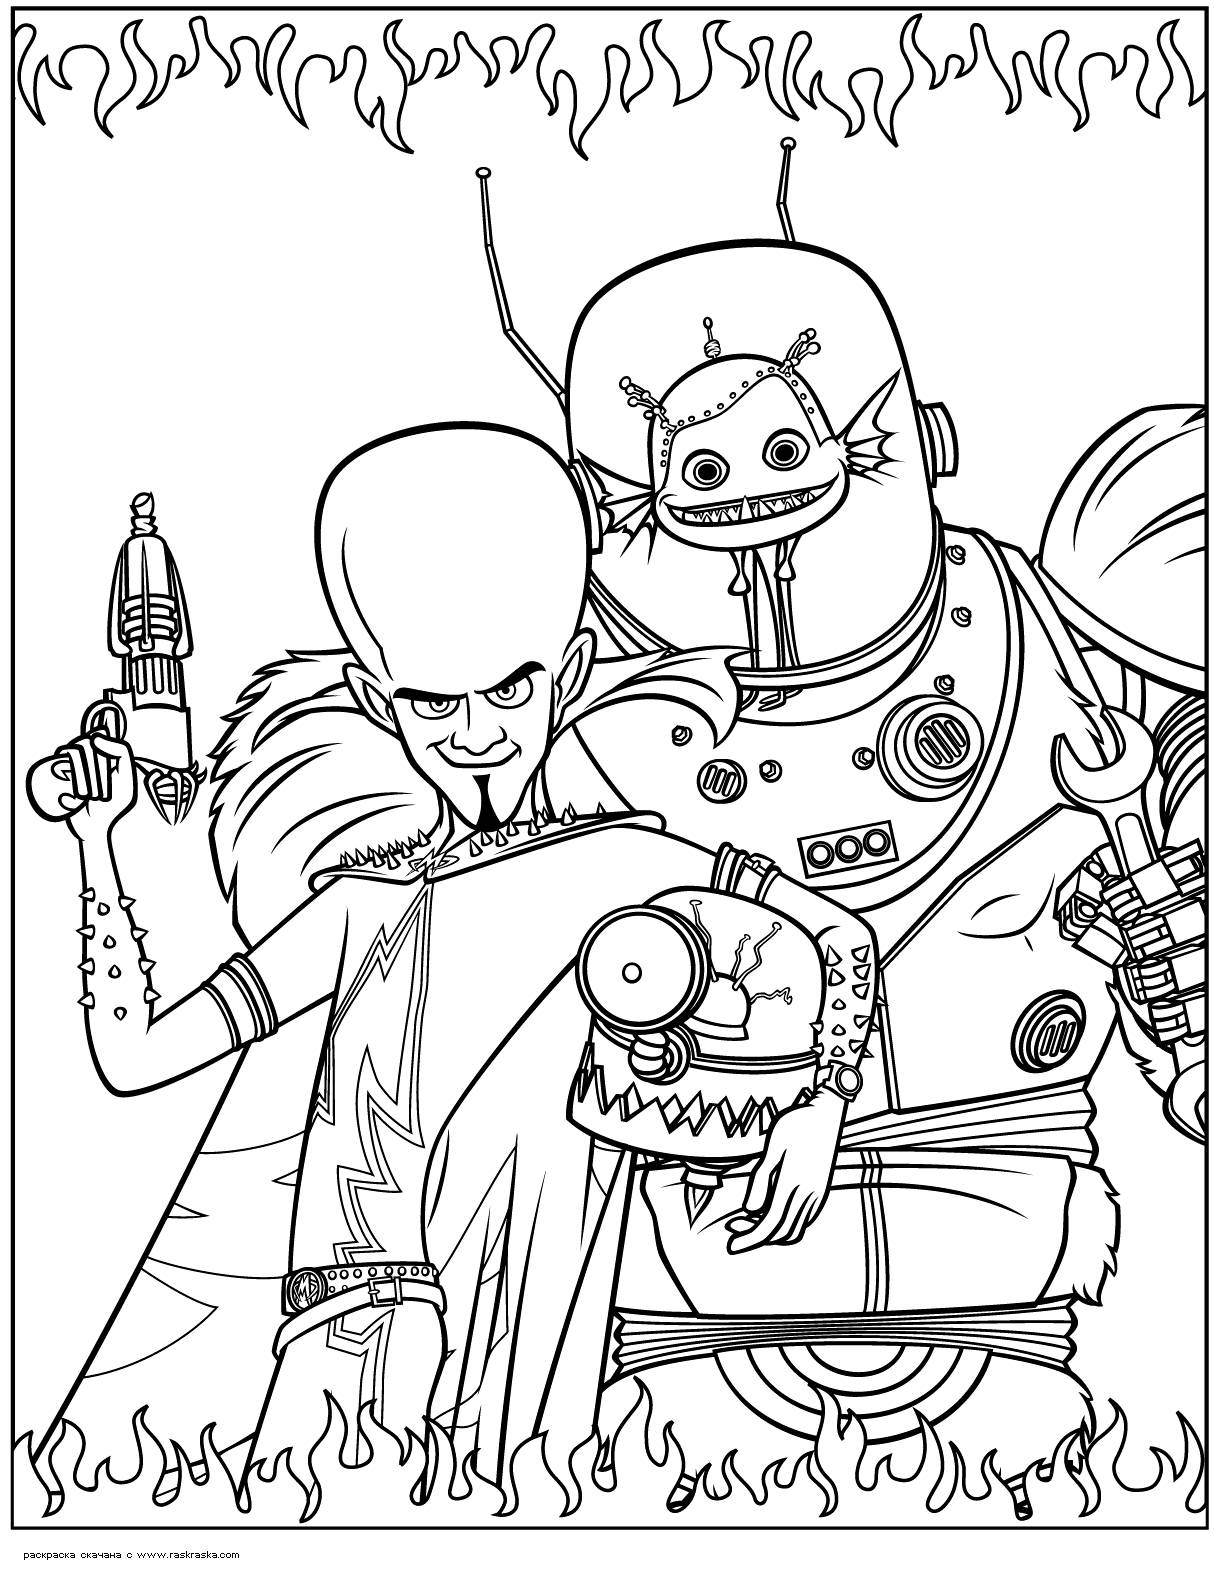 Megamind coloring page